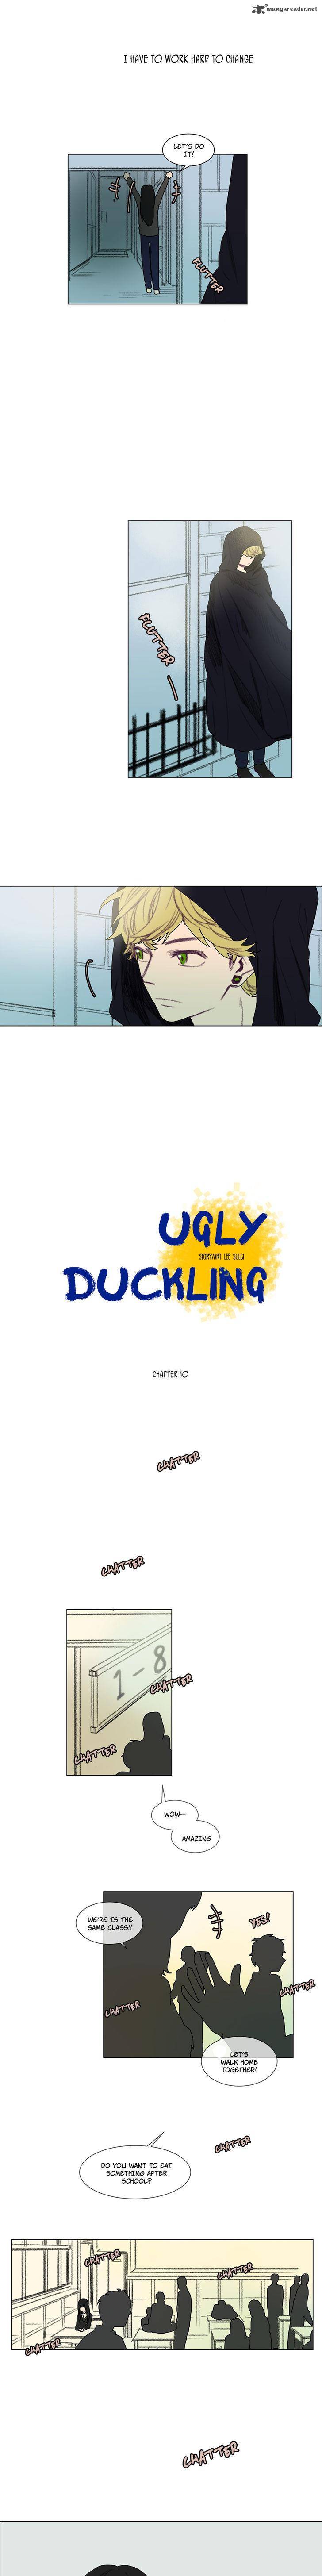 ugly_duckling_10_4